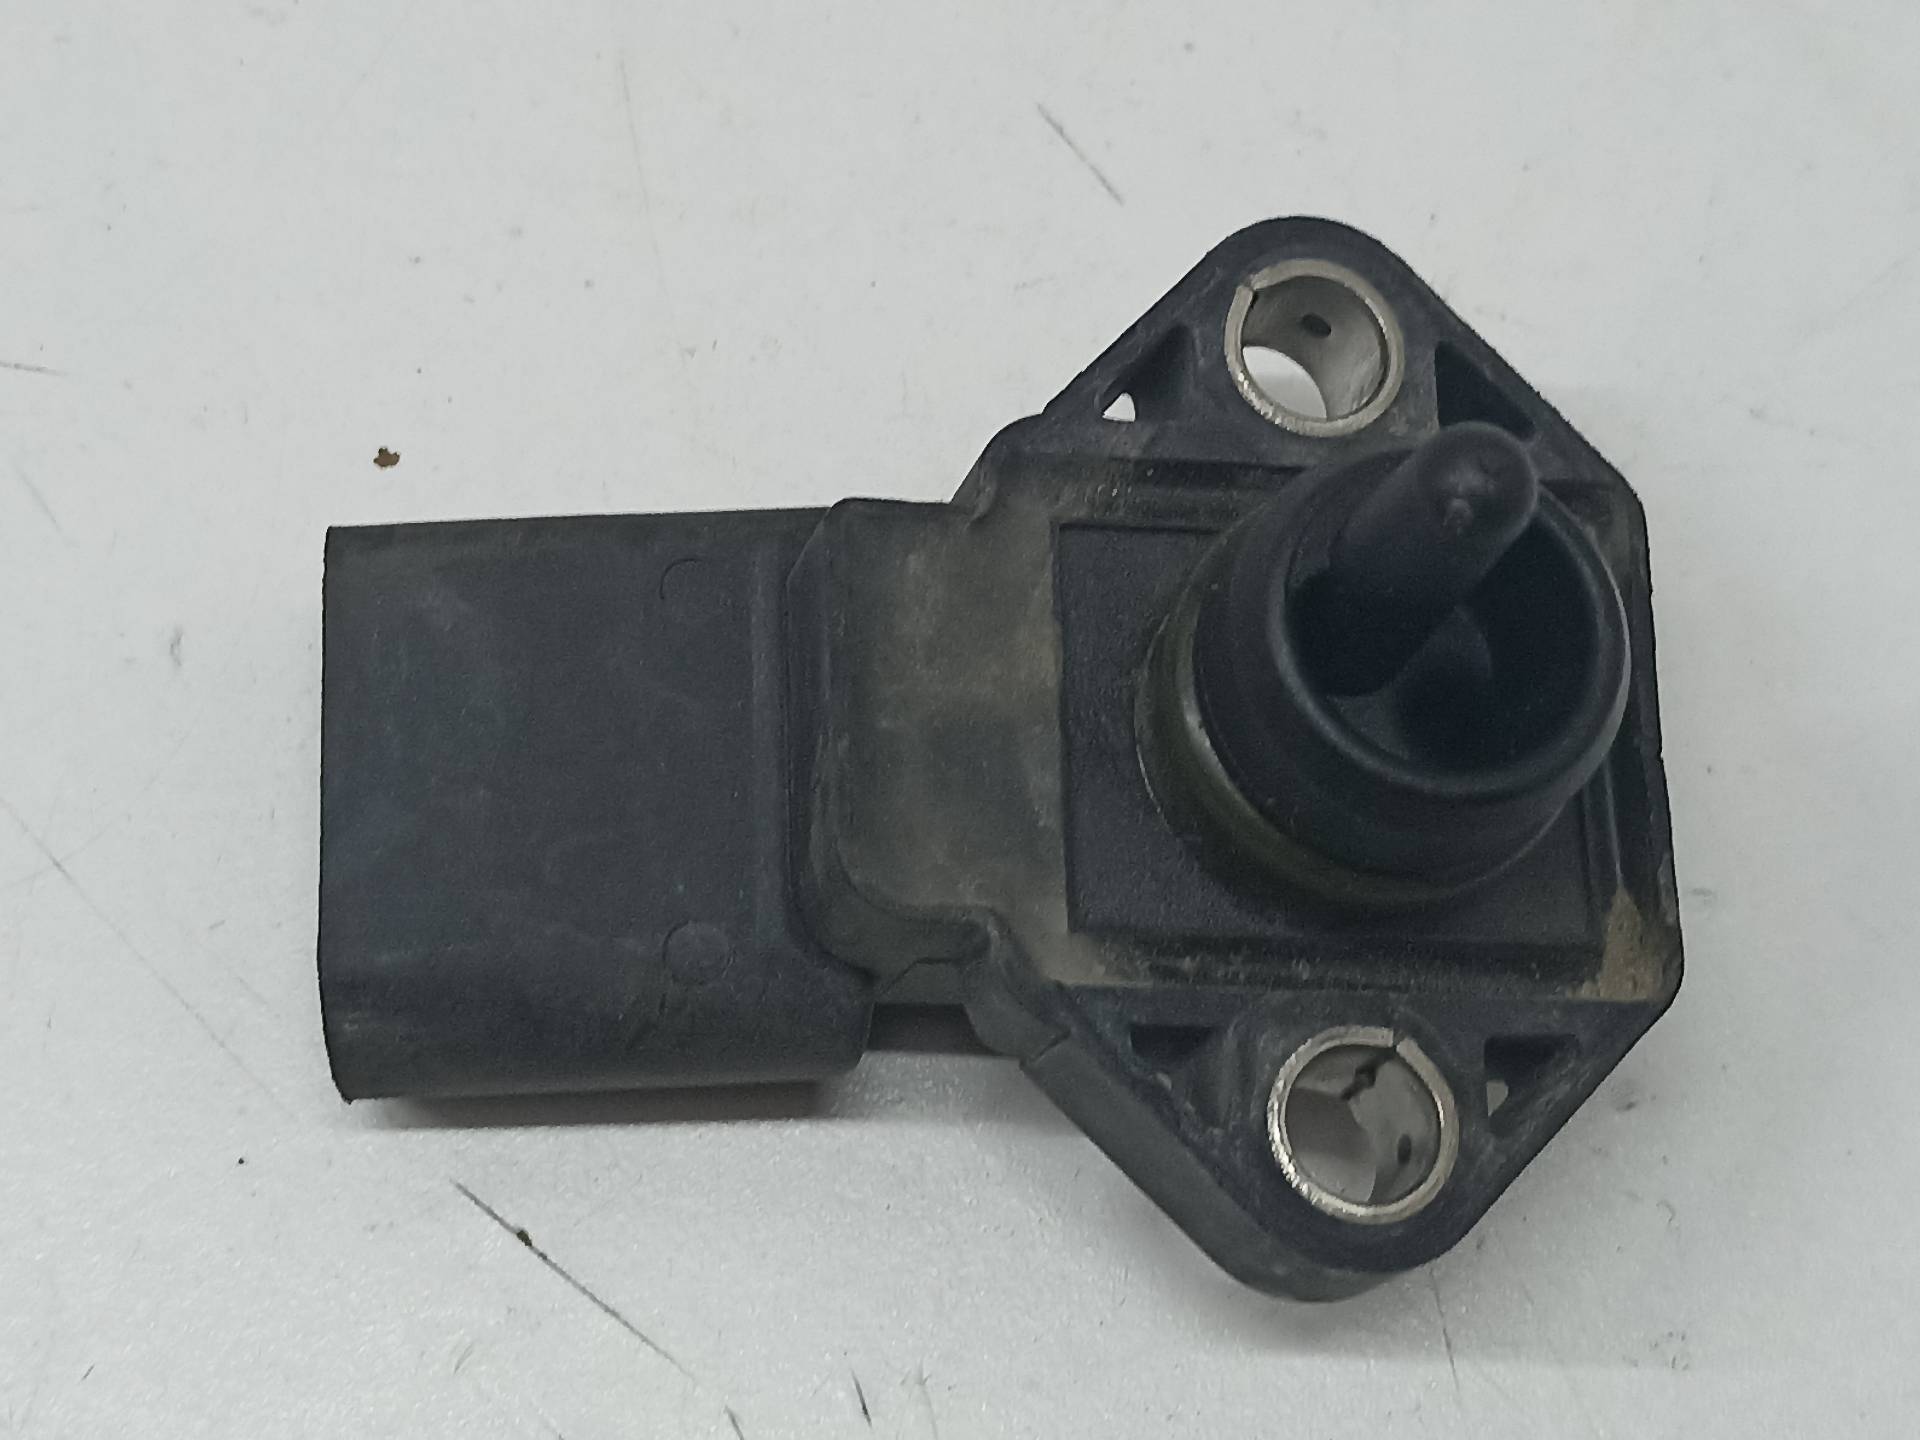 SEAT Leon 1 generation (1999-2005) Other Control Units 0281002177, 336664573152, 152 24315735